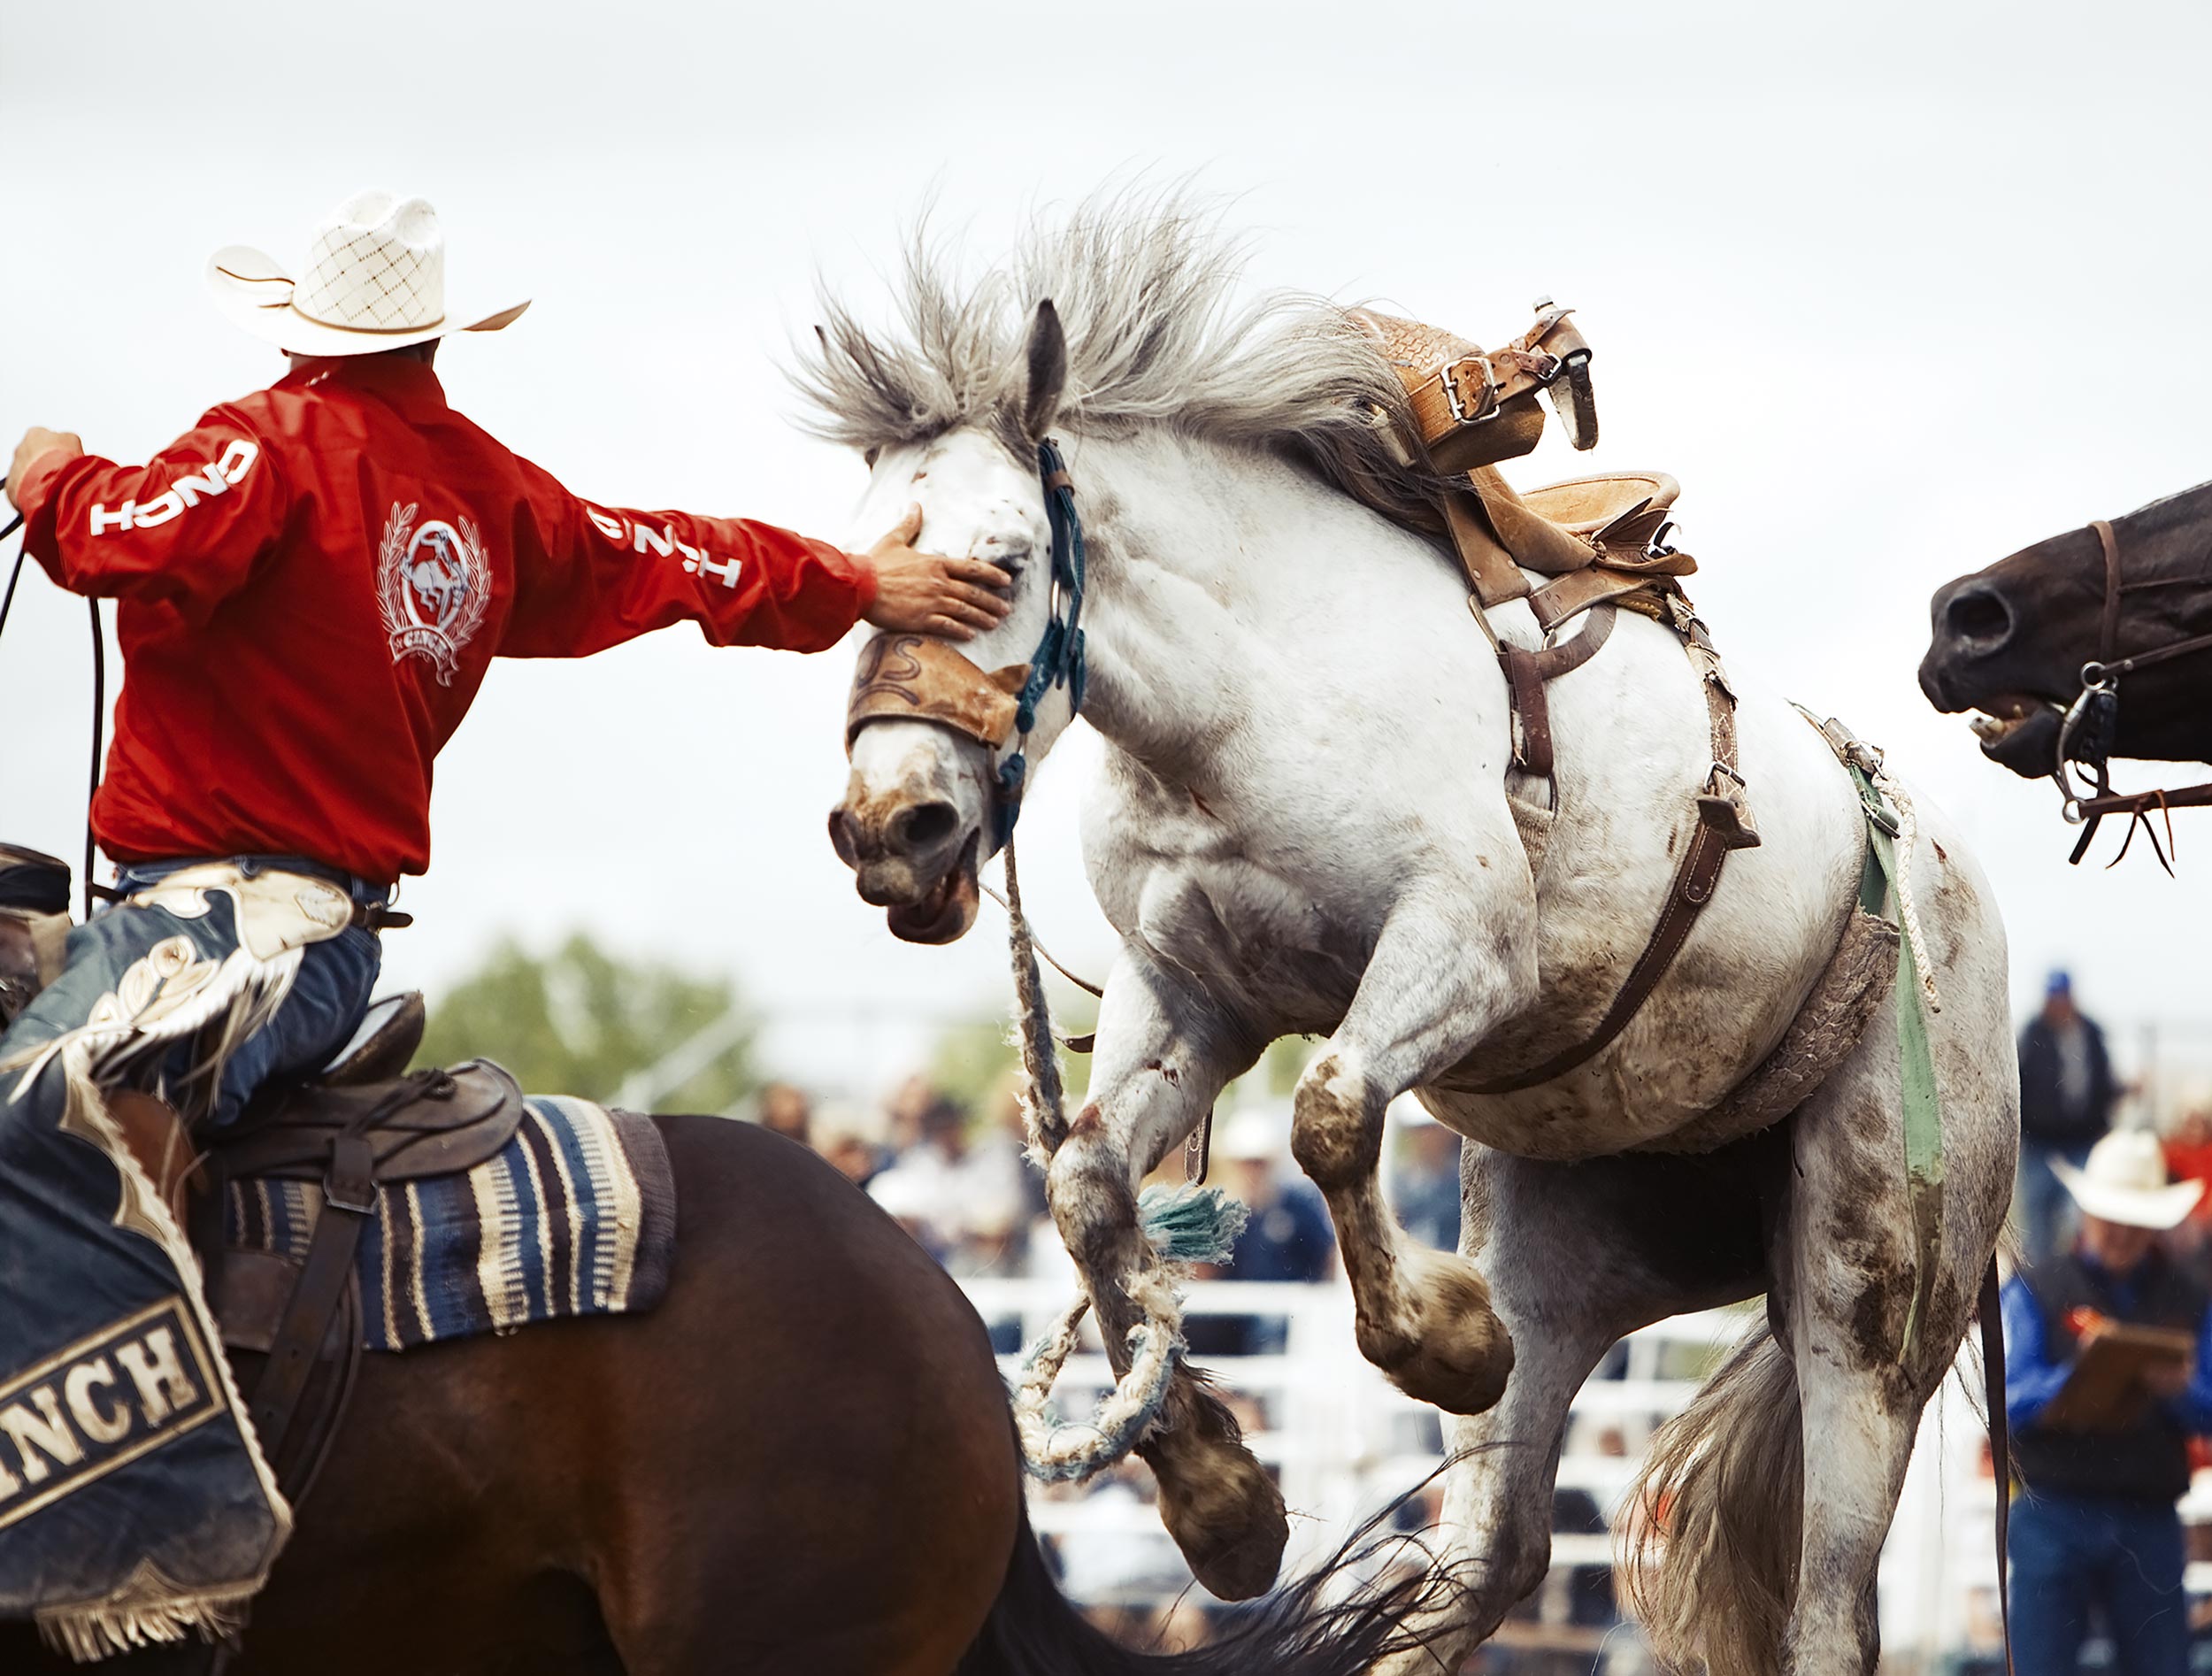 Rodeo pick up men getting a bucking horse under control